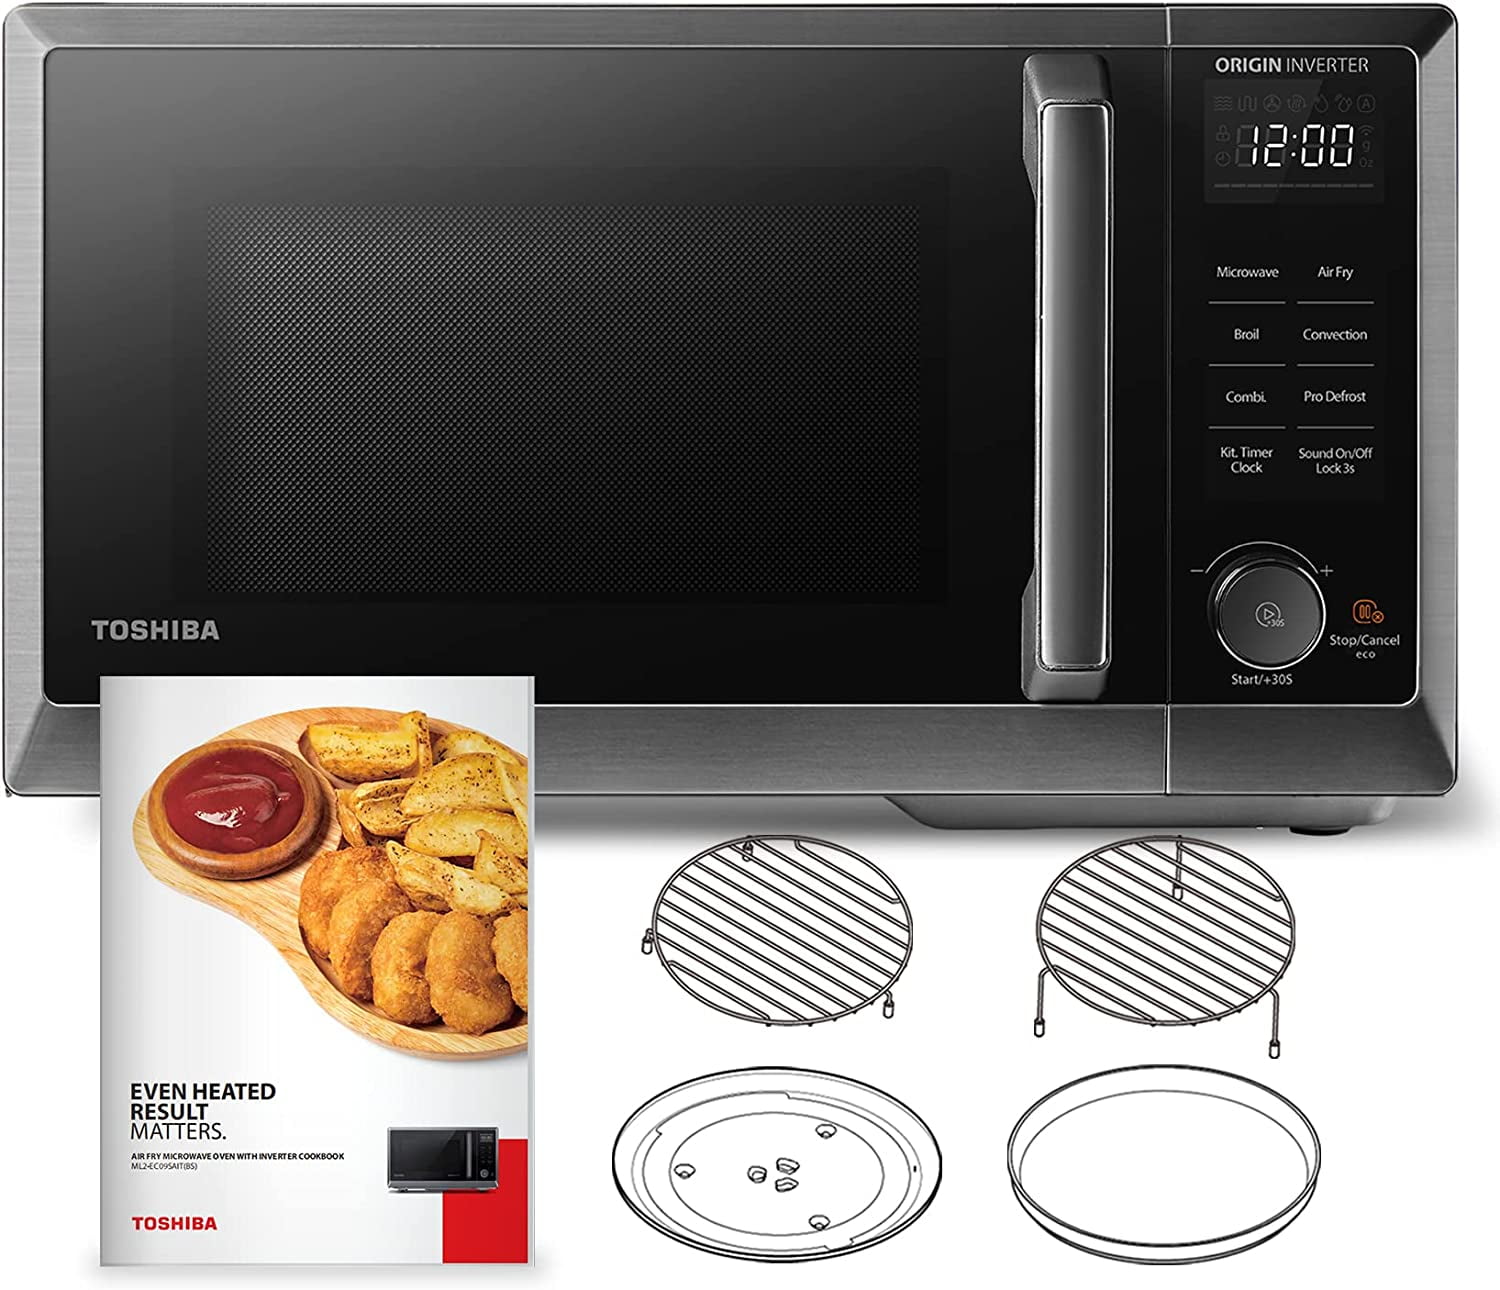 TOSHIBA 7-in-1 Countertop Microwave Oven Air Fryer Combo, MASTER Series,  Inverter, Convection, Broil, Speedy Combi, Even Defrost, Humidity Sensor,  Mute Function, 27 Auto Menu&47 Recipe, 1.0 cf 1000W